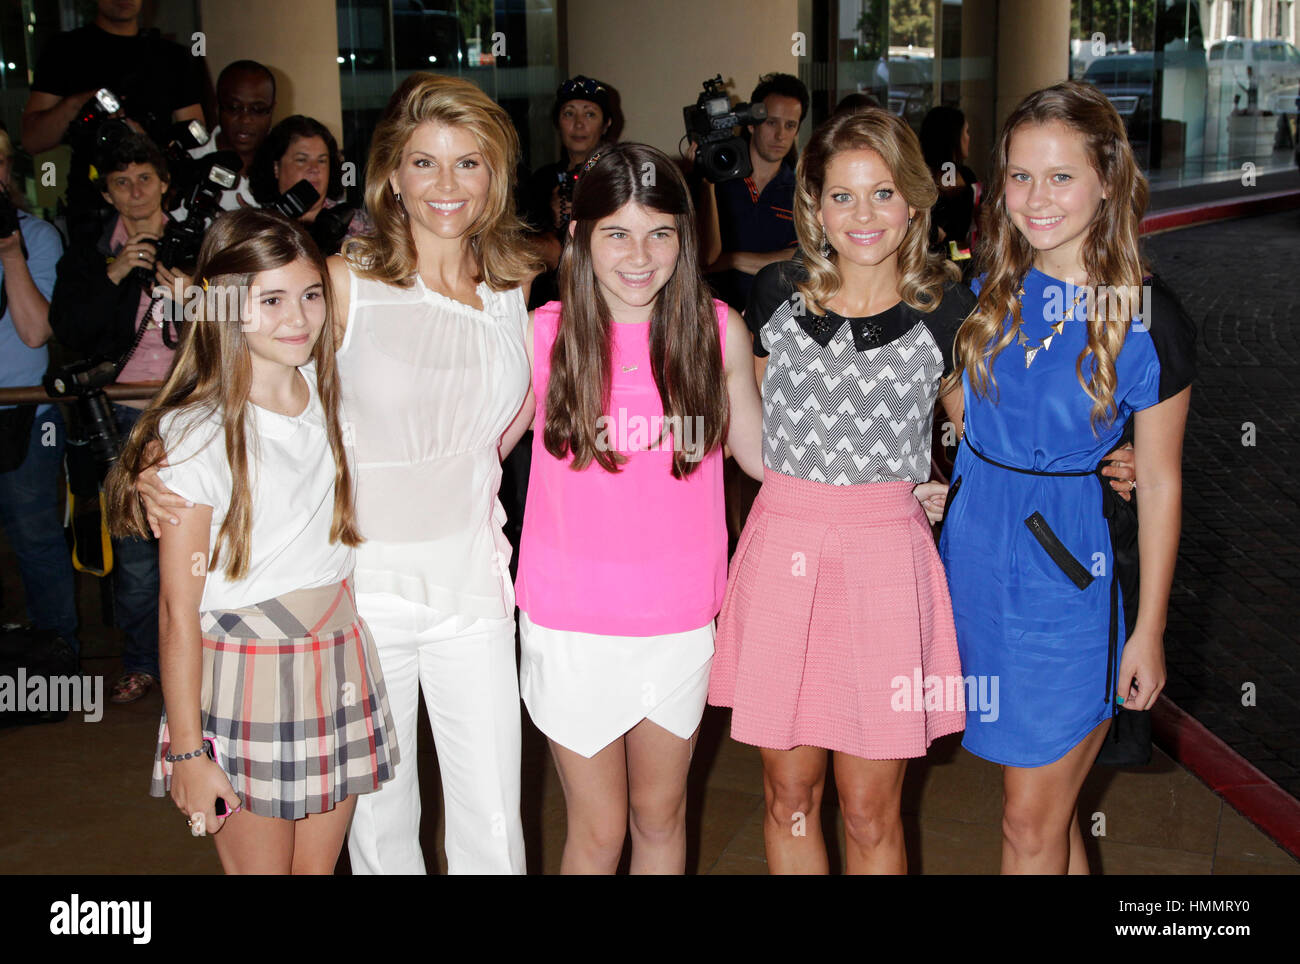 From left, Olivia Jade Giannulli, her mother, Lori Loughlin, Isabella Rose Giannulli, with Candace Cameron Bure and her daughter, Natasha Valerievna Bure arrive for the Hallmark Channel and Hallmark Movie Channel presentation at the 2013 Summer TV Critics Press Tour on July 24, 2013 in Beverly Hills, California. Photo by Francis Specker Stock Photo